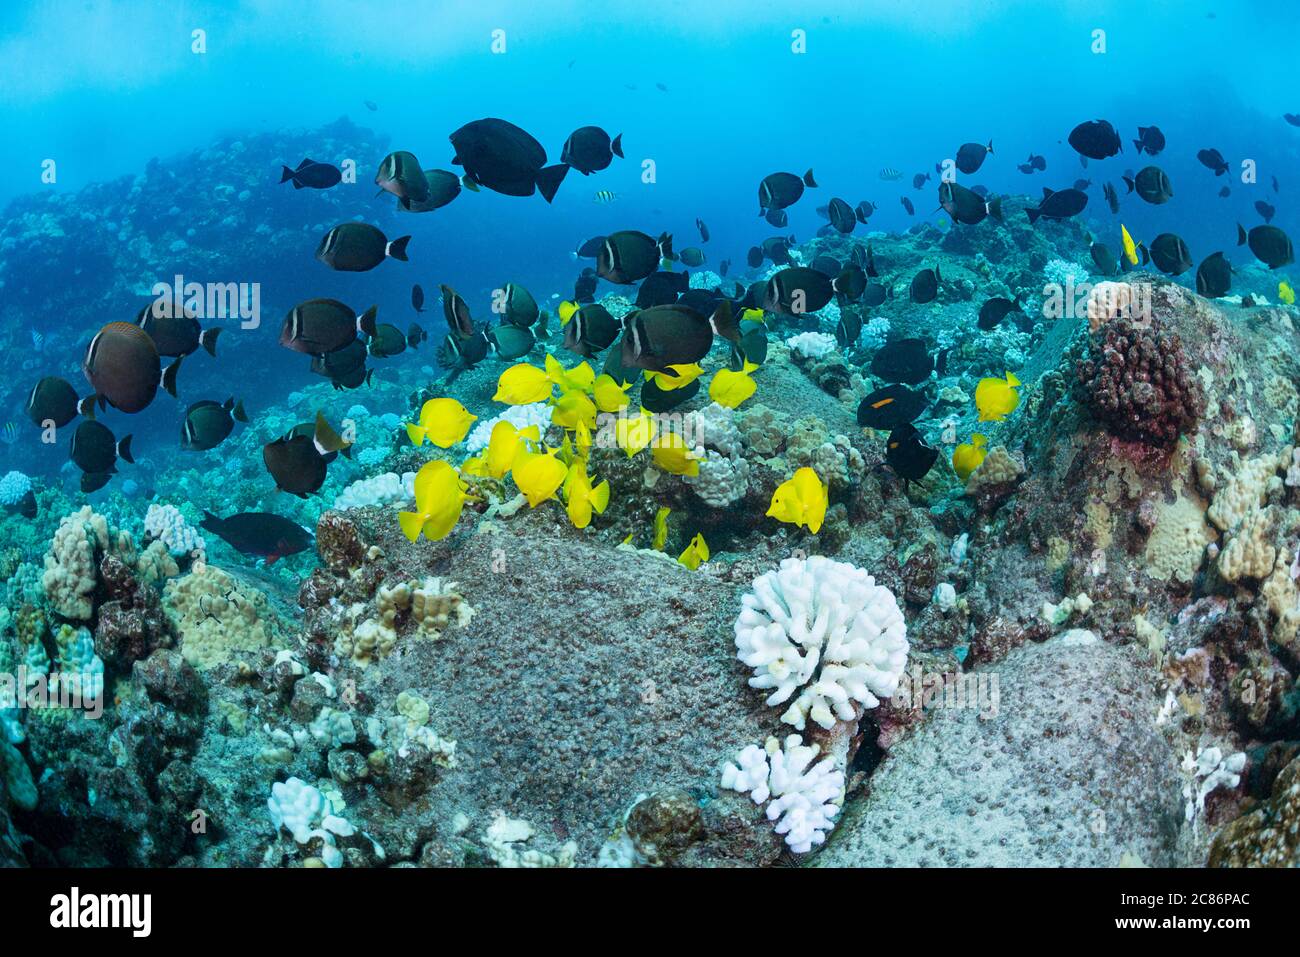 yellow tangs, Zebrasoma flavescens, and whitebar surgeonfish, Acanthurus leucopareius, swim over a reef festooned with bleached white corals, Hawaii Stock Photo